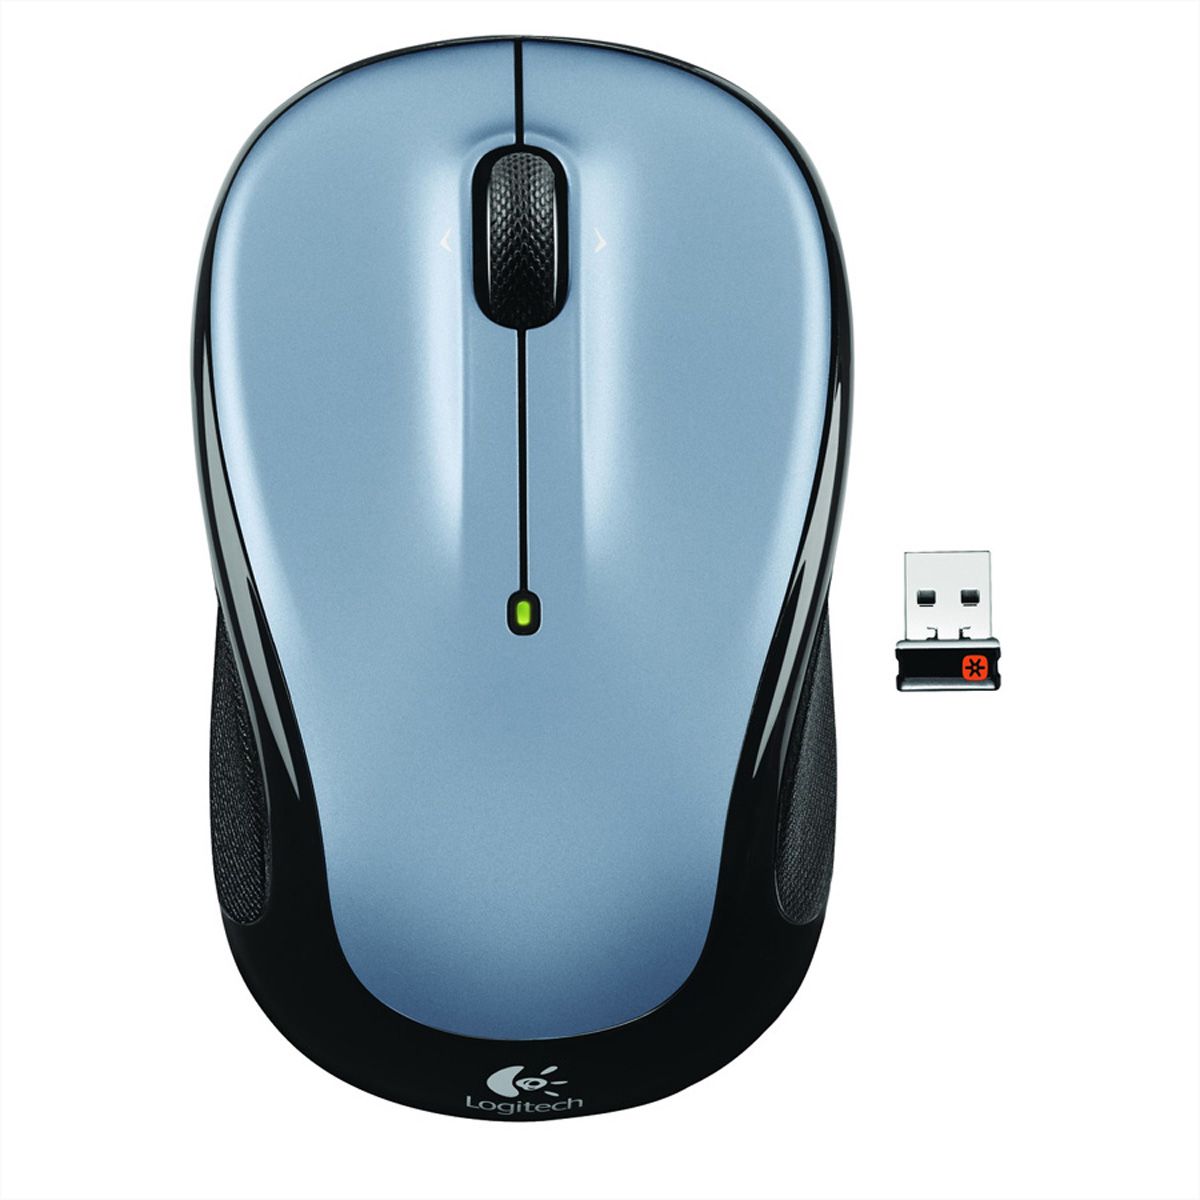 difference between m325 and m310 logitech mouse